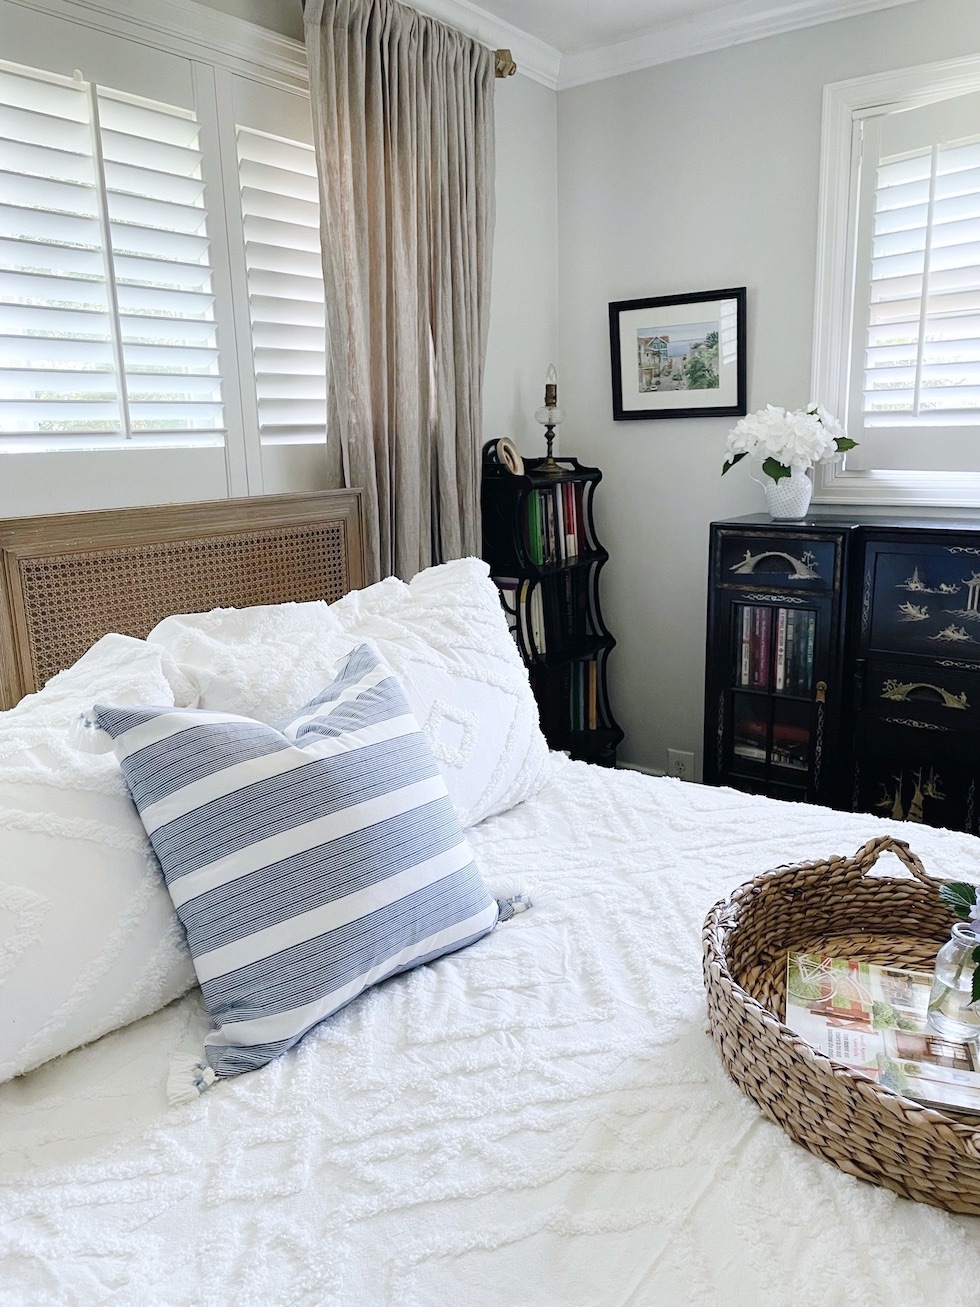 Six Favorite Tips for Decorating a Summer Bedroom